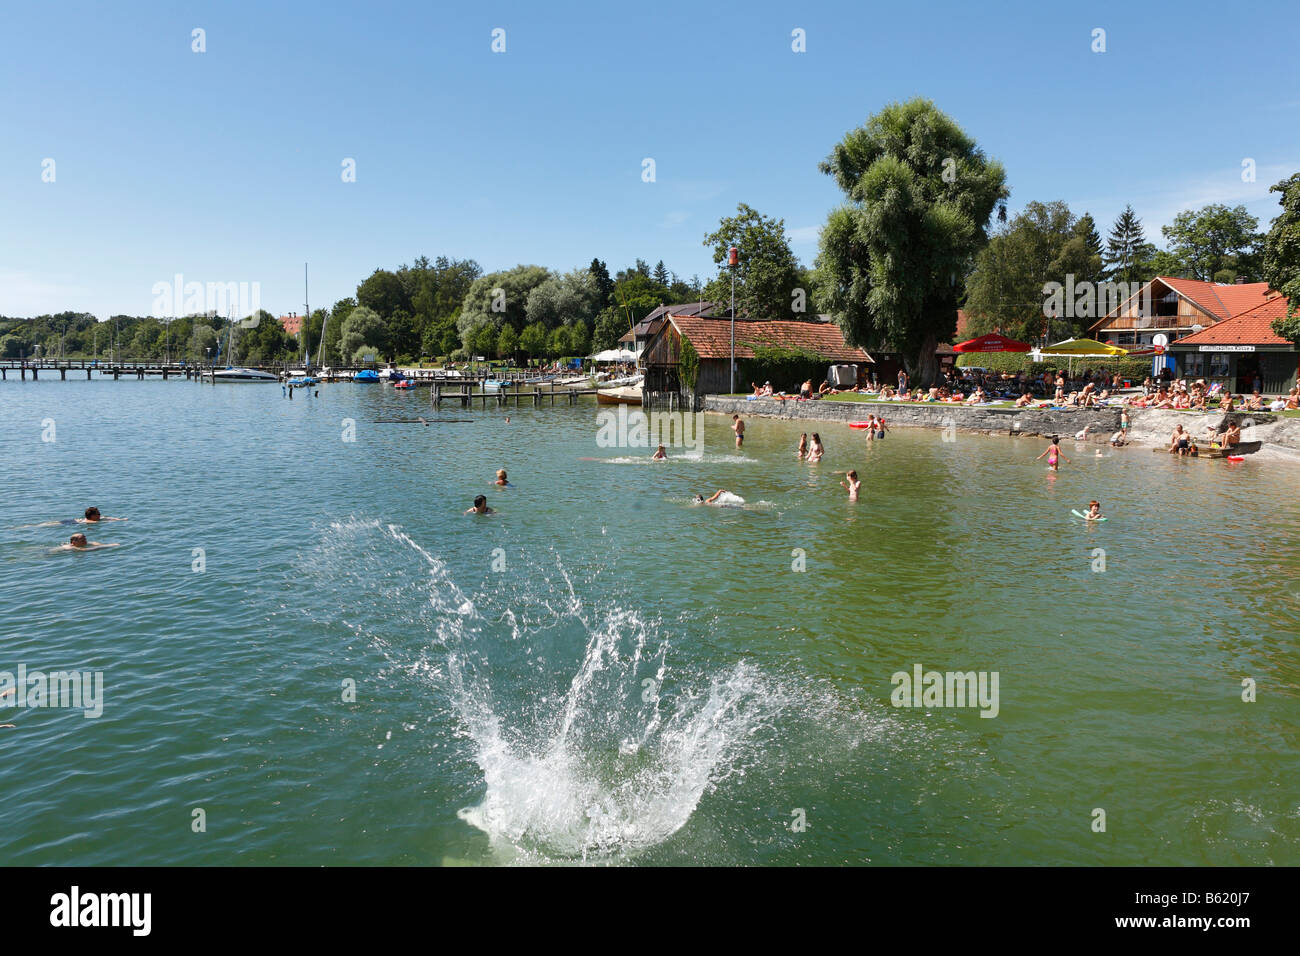 Beach in Utting on Lake Ammersee, Fuenfseenland, Upper Bavaria, Germany, Europe Stock Photo